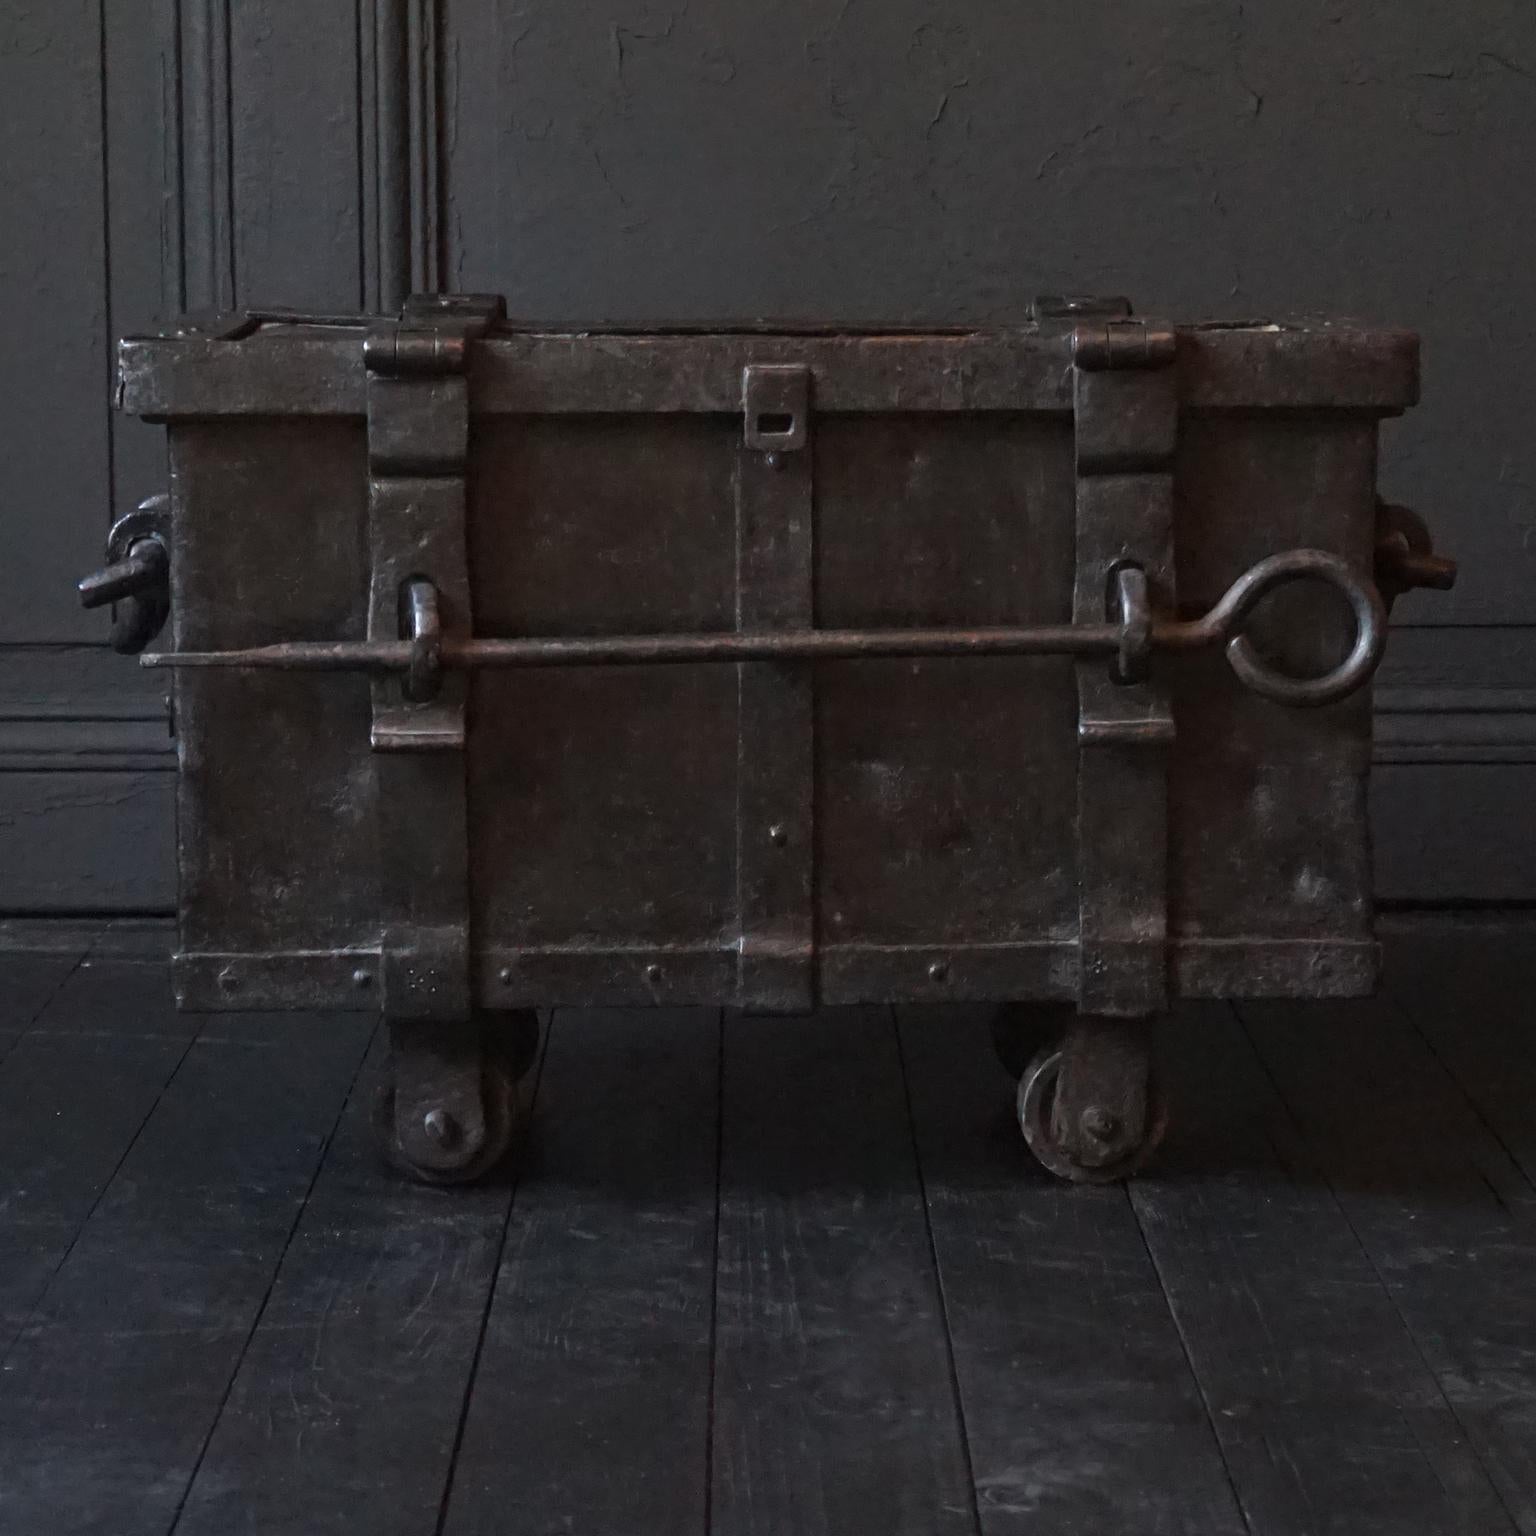 A rare amazing heavy (25+ kilos) handmade German Neurenberg war ammunition or treasure chest on wheels from the first half of the 19th century. 
Rectangular strongbox of sheet iron with cast and wrought iron reinforced edges and hinges. 
Without